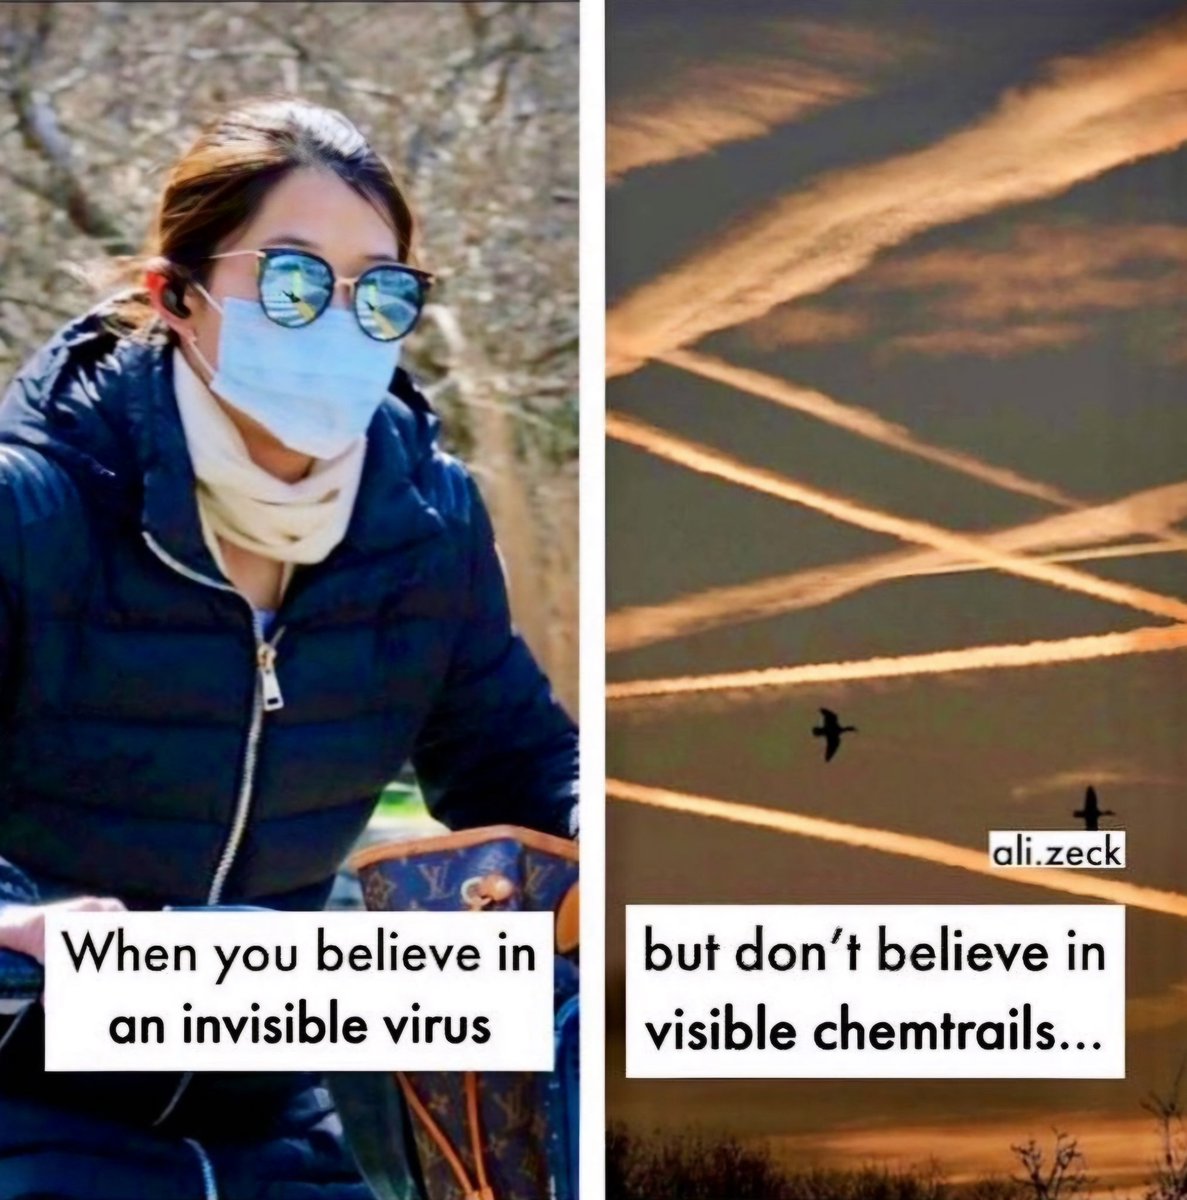 You'll lose your mind over an invisible virus, but you refuse to believe something you can actually see with your own eyes if you pay attention Notice we don't have bright blue skies anymore? We have haze, odd clouds & rain #chemtrails #DimmingTheSun #GeoEngineering